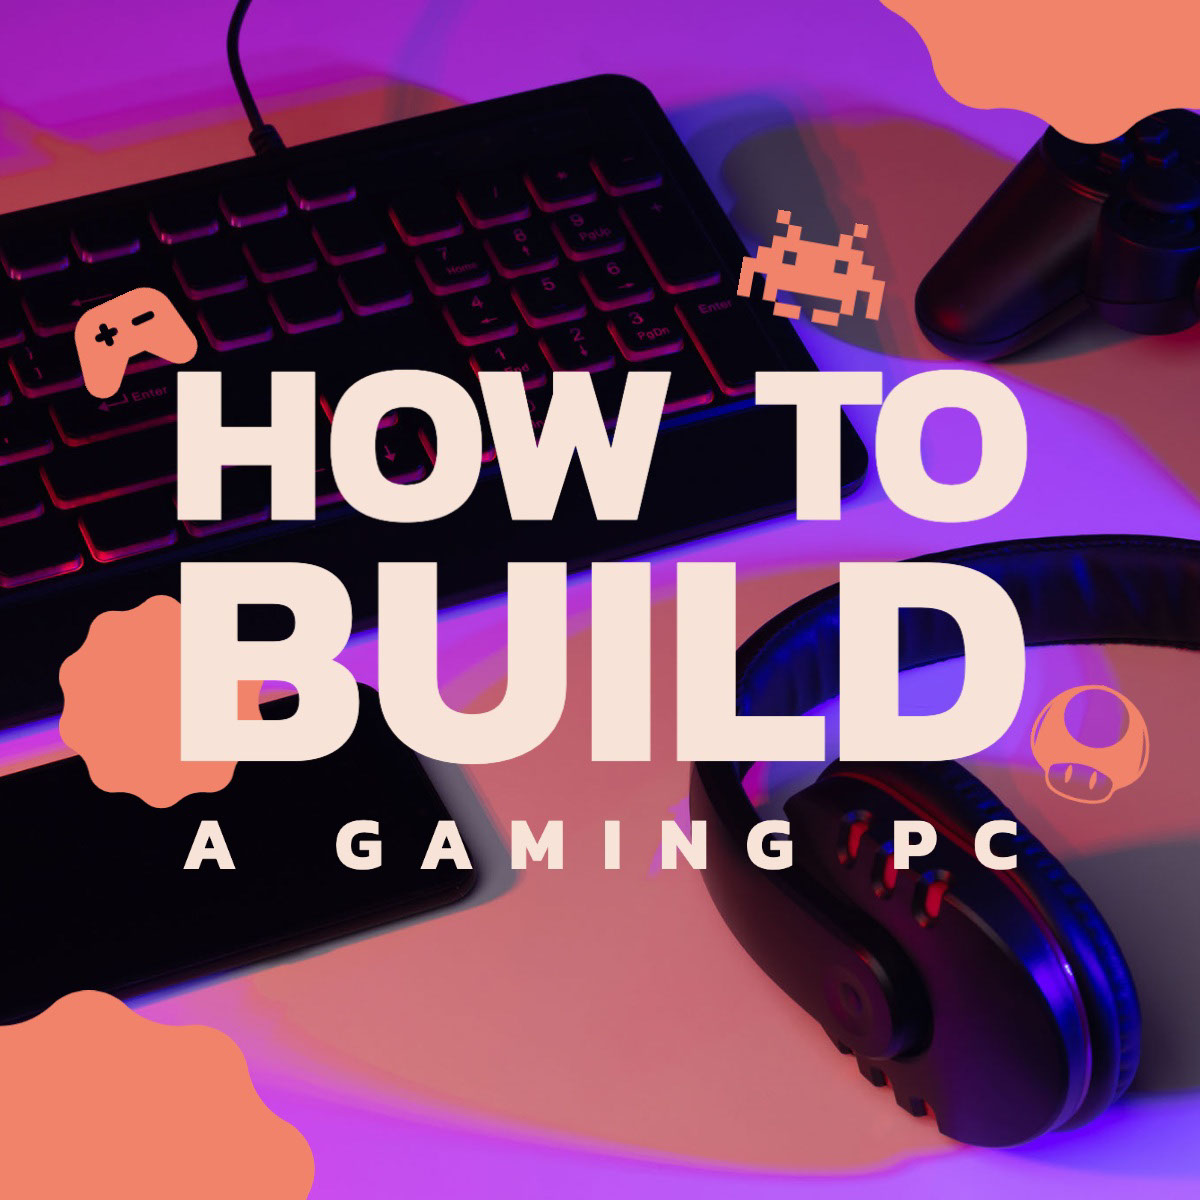 Pink & Black How to Build a Gaming PC Pinterest Post HOW TO BUILD A GAMING PC